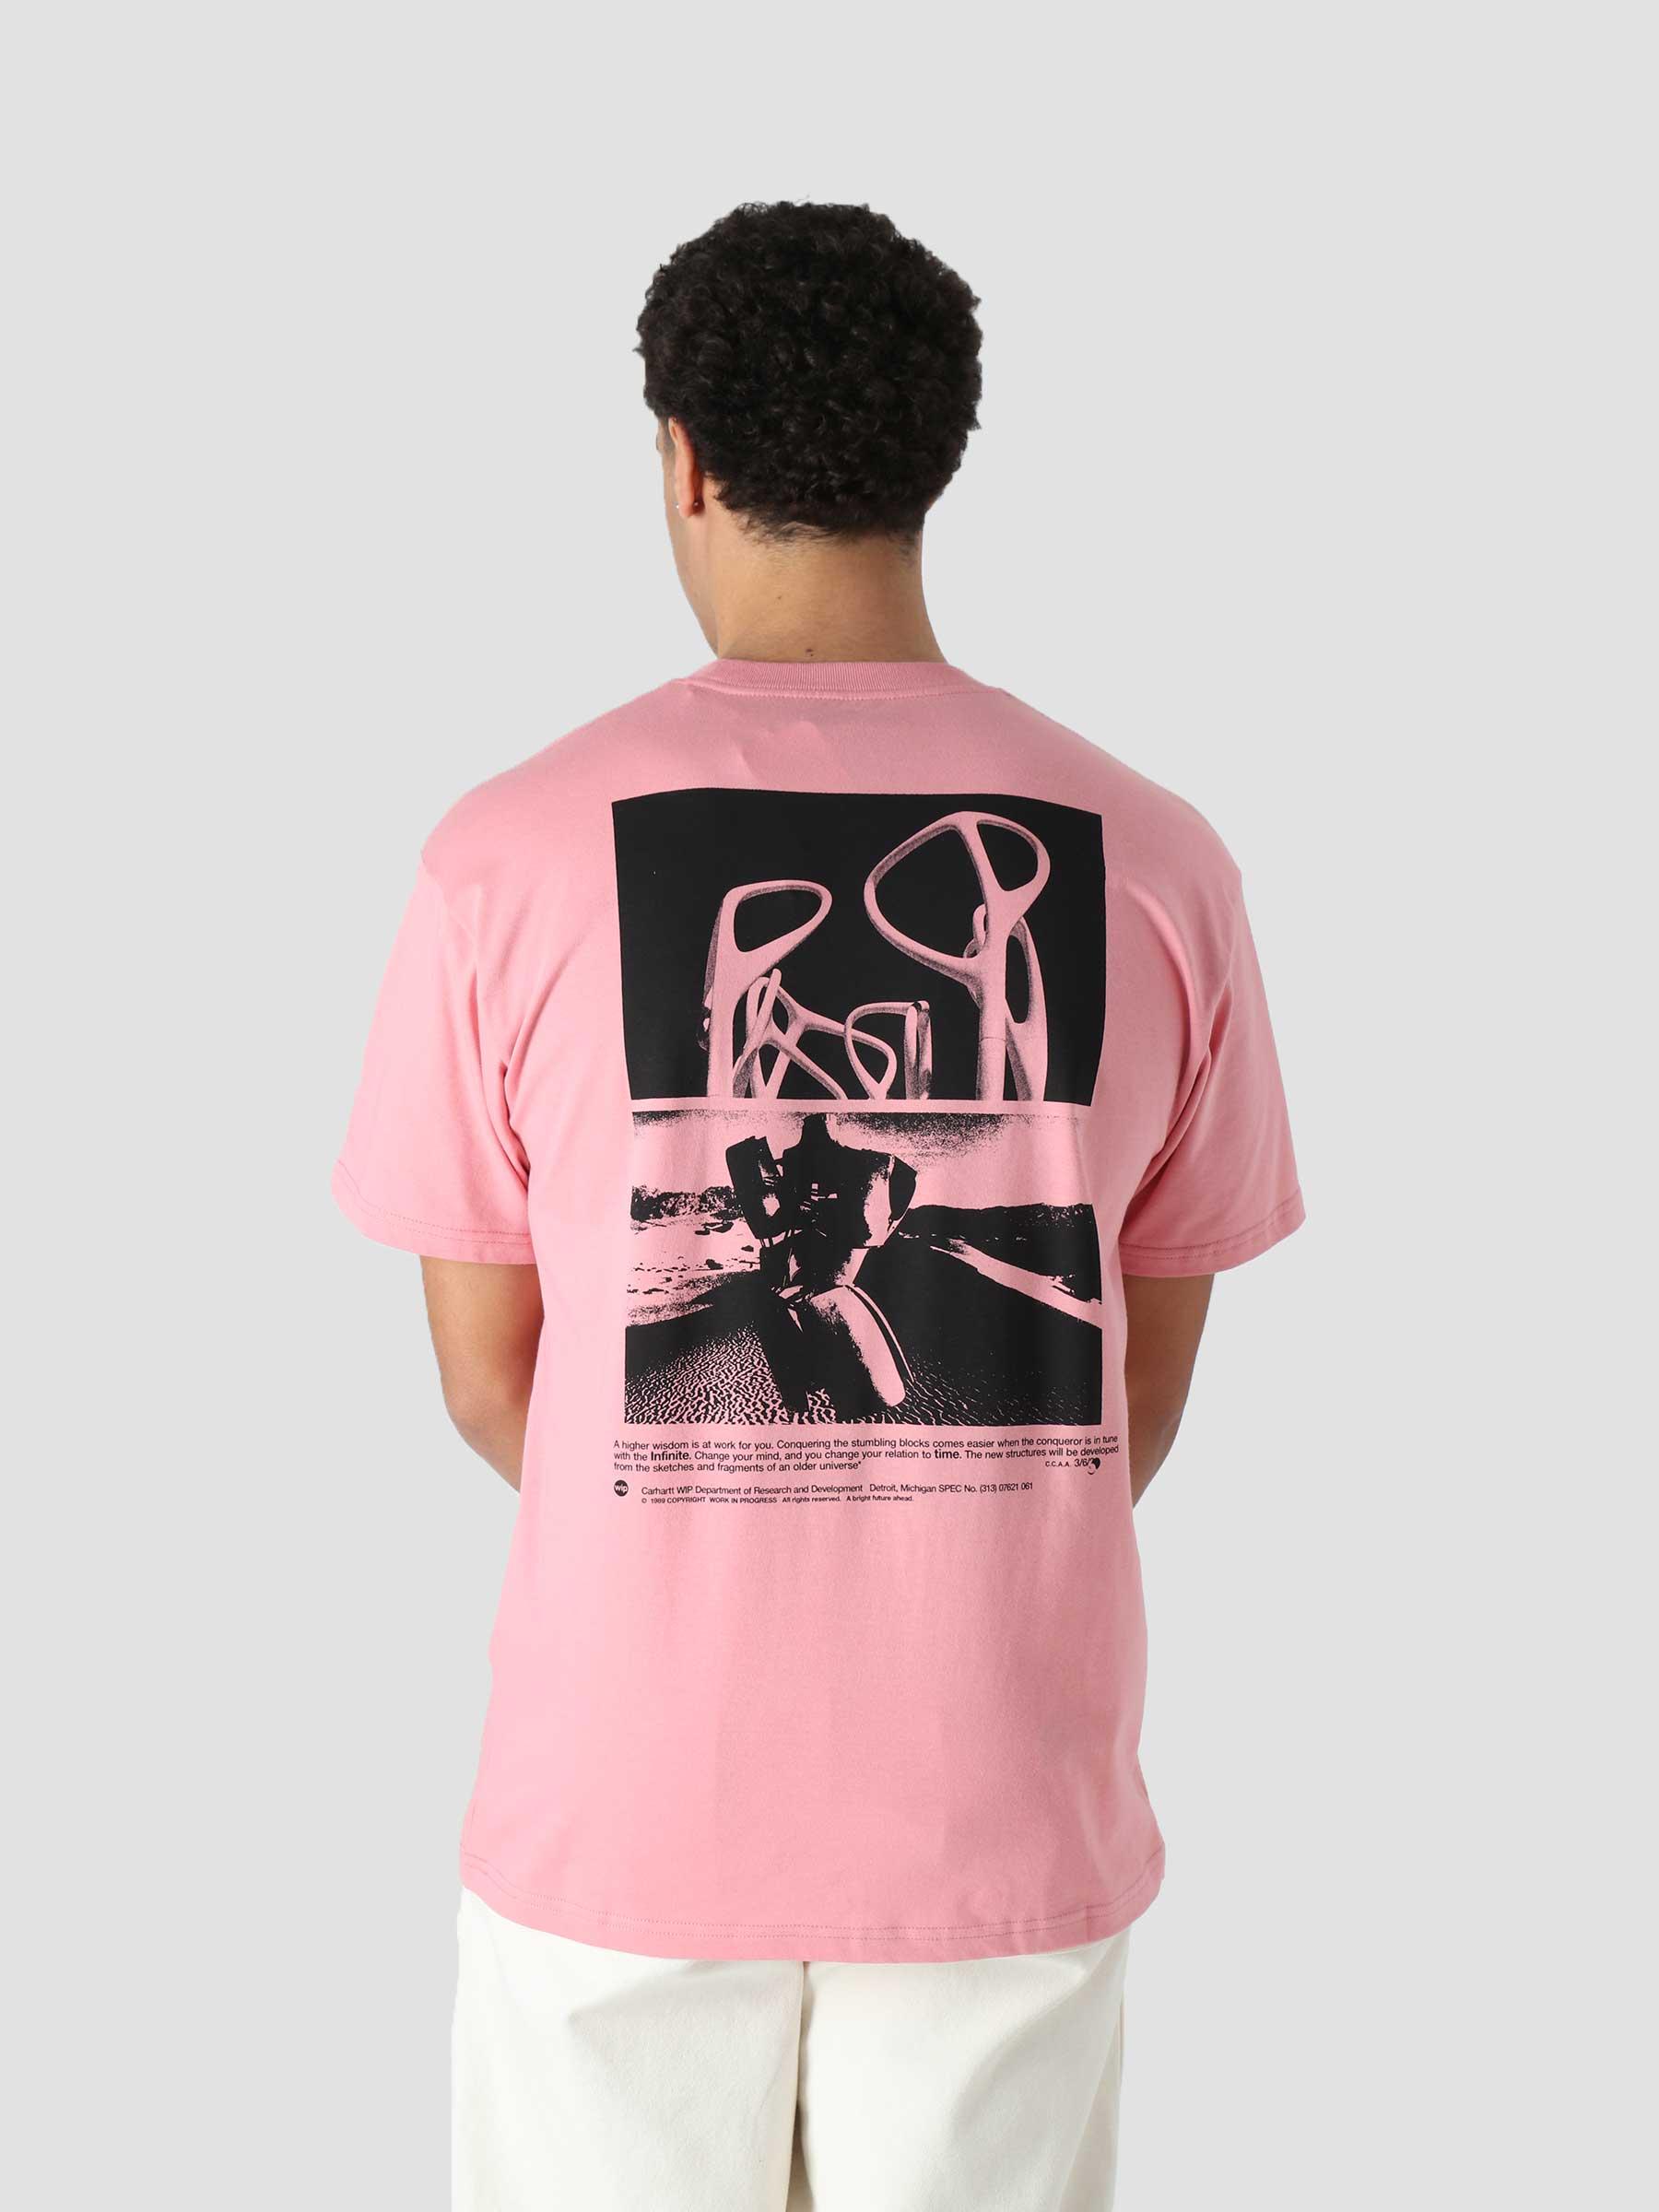 S/S Structures T-Shirt Rothko Pink Black I030187-0XSXX